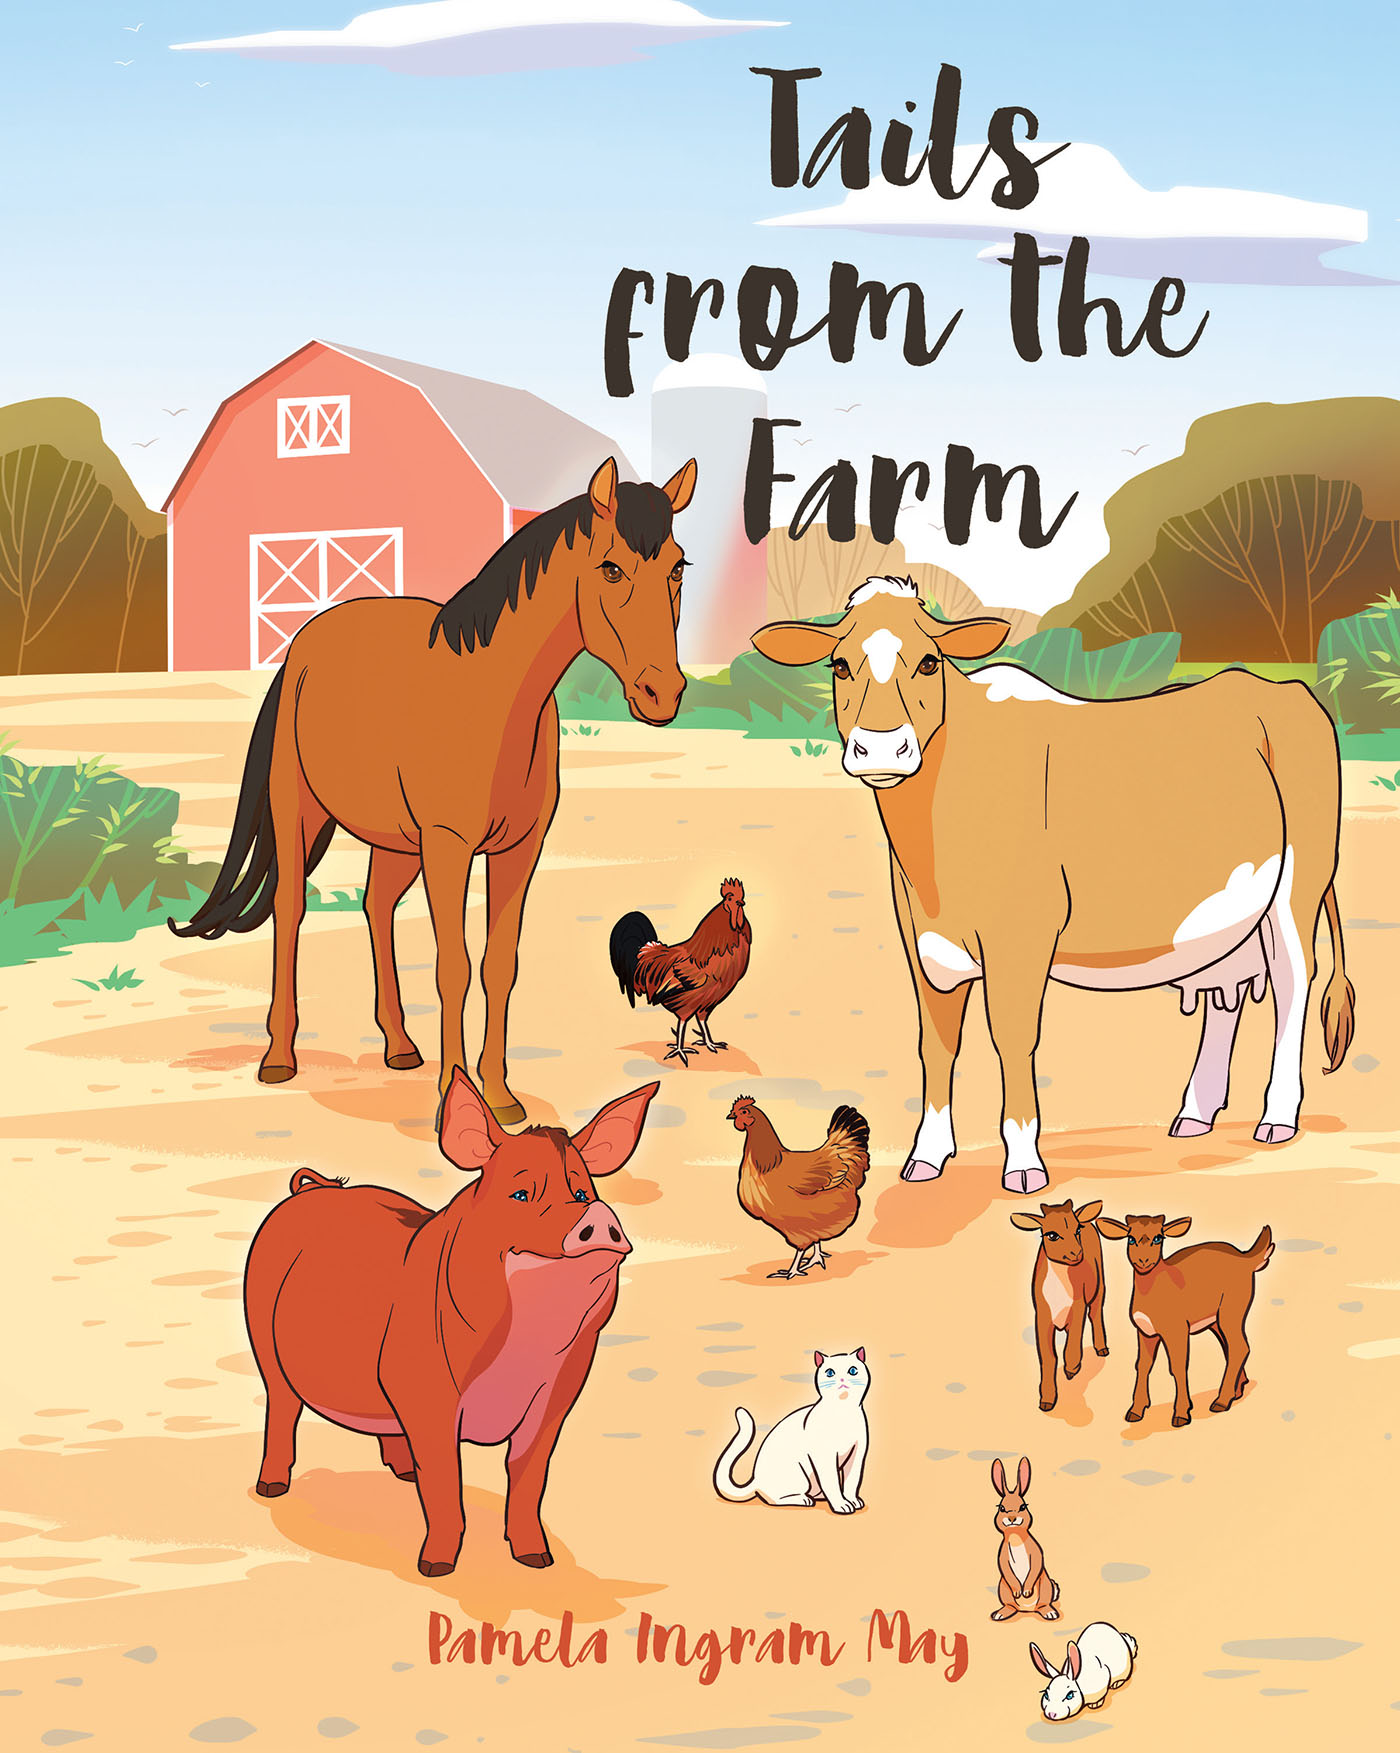 Author Pamela Ingram May’s New Book "Tails from the Farm" is a Series of Stories Following the Adventures of a Girl Named May Who Cares for All Sorts of Animals on a Farm